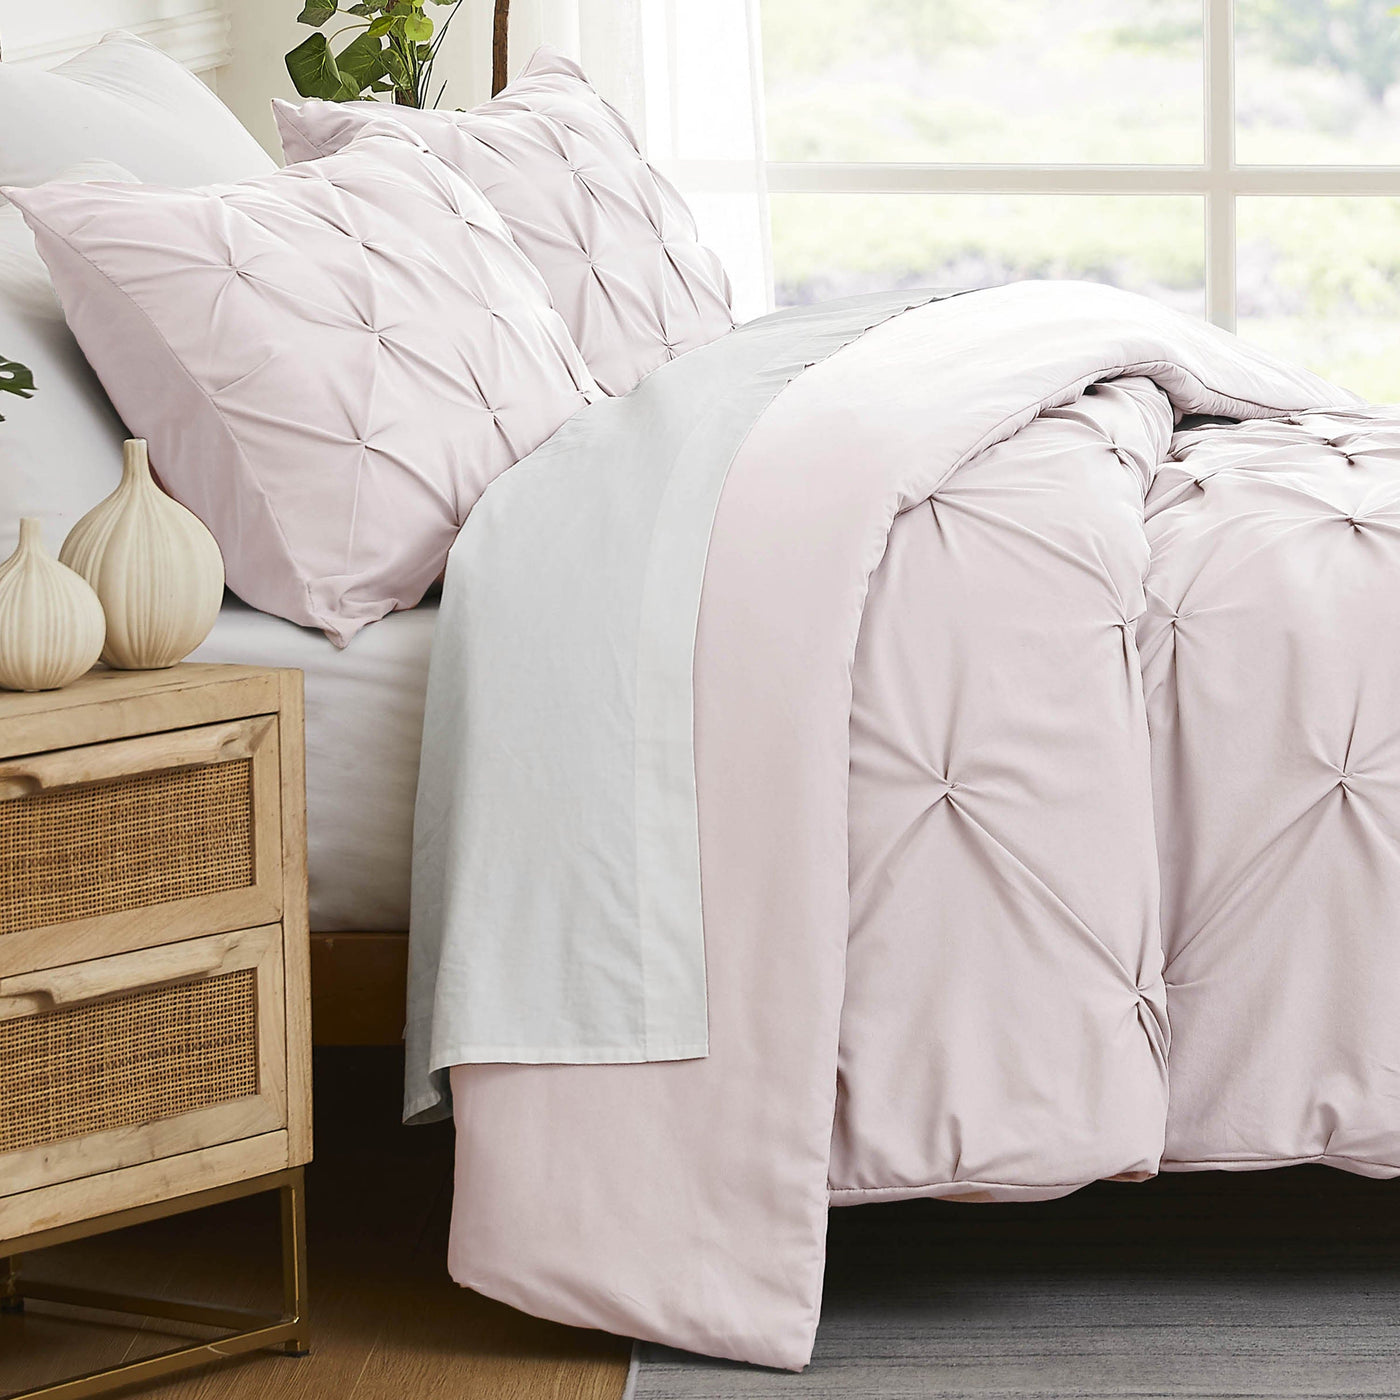 Side View of Pintuck Pinch Pleated Duvet Cover Set in Bone#color_vilano-bone